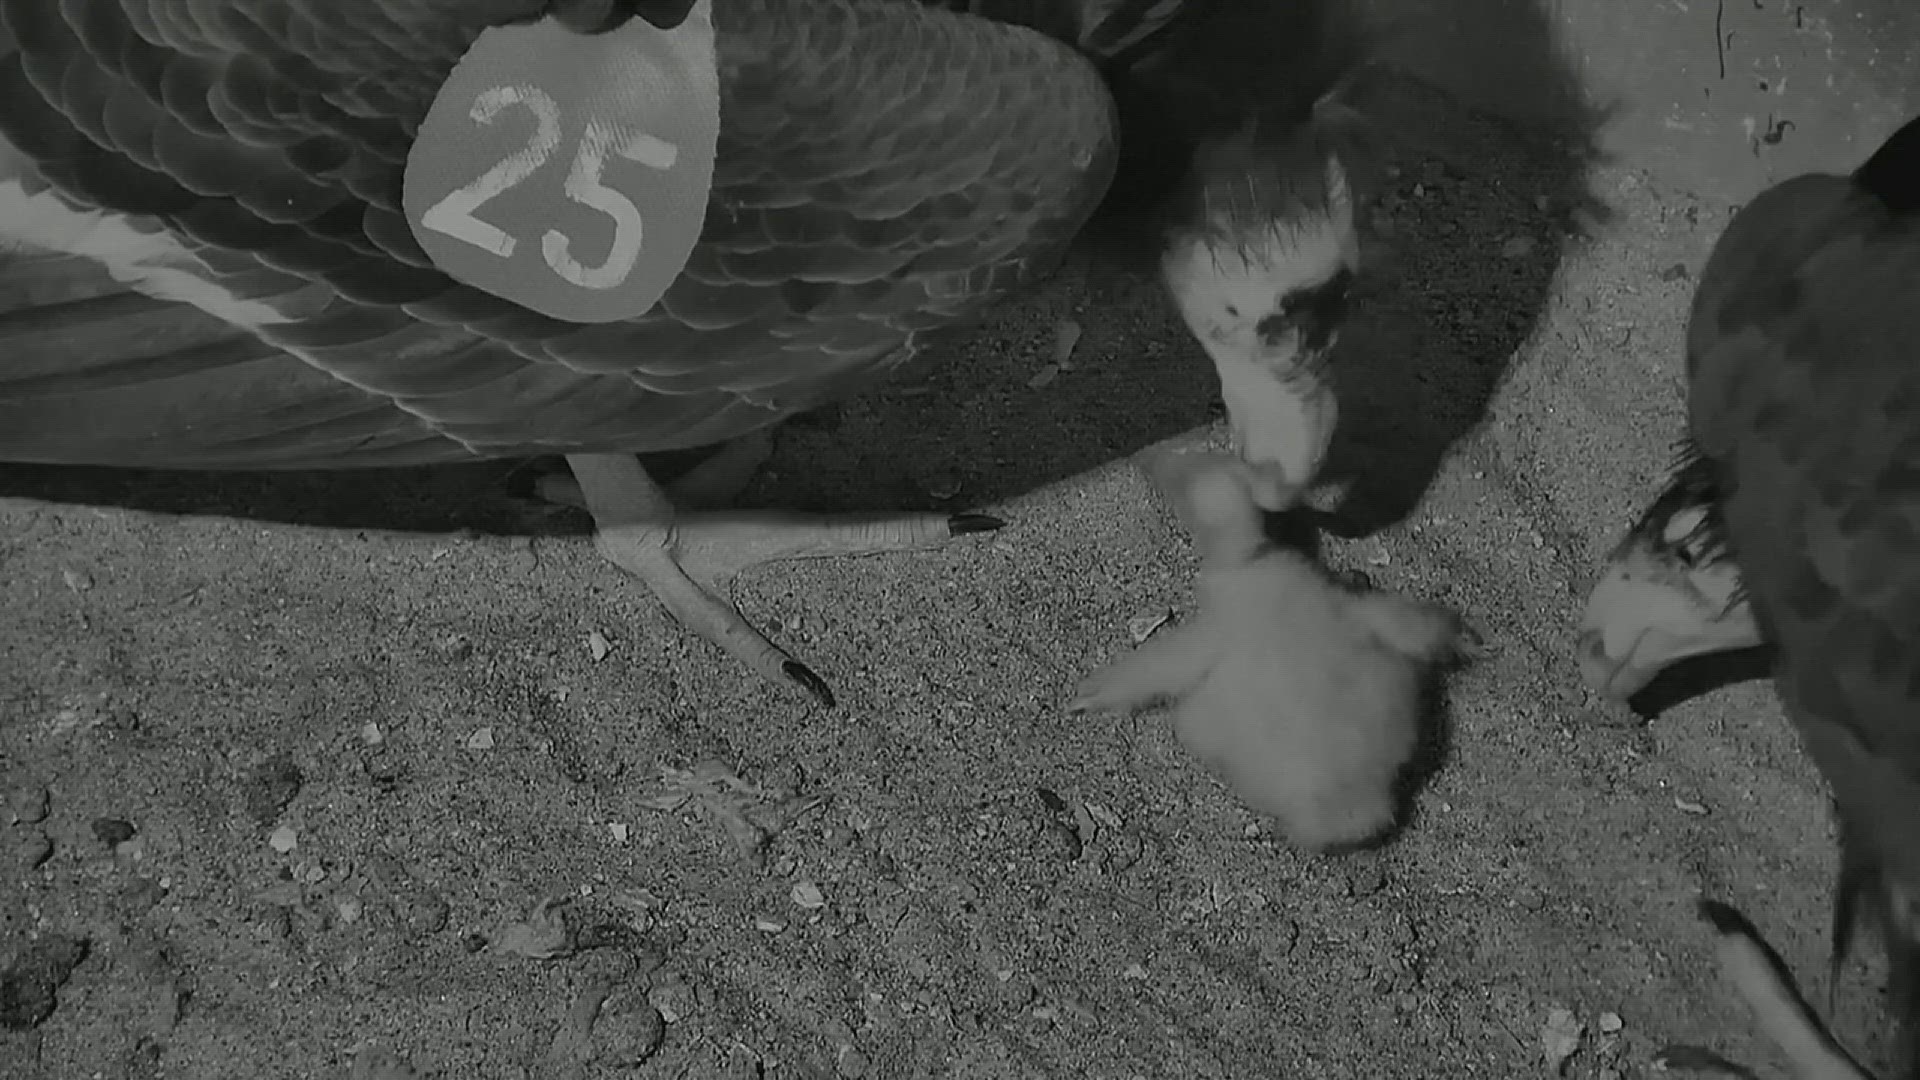 A newborn Cali Condor hatched at the San Diego Zoo. The chick is one of 214 California Condors in captivity. The animal is critically endangered.